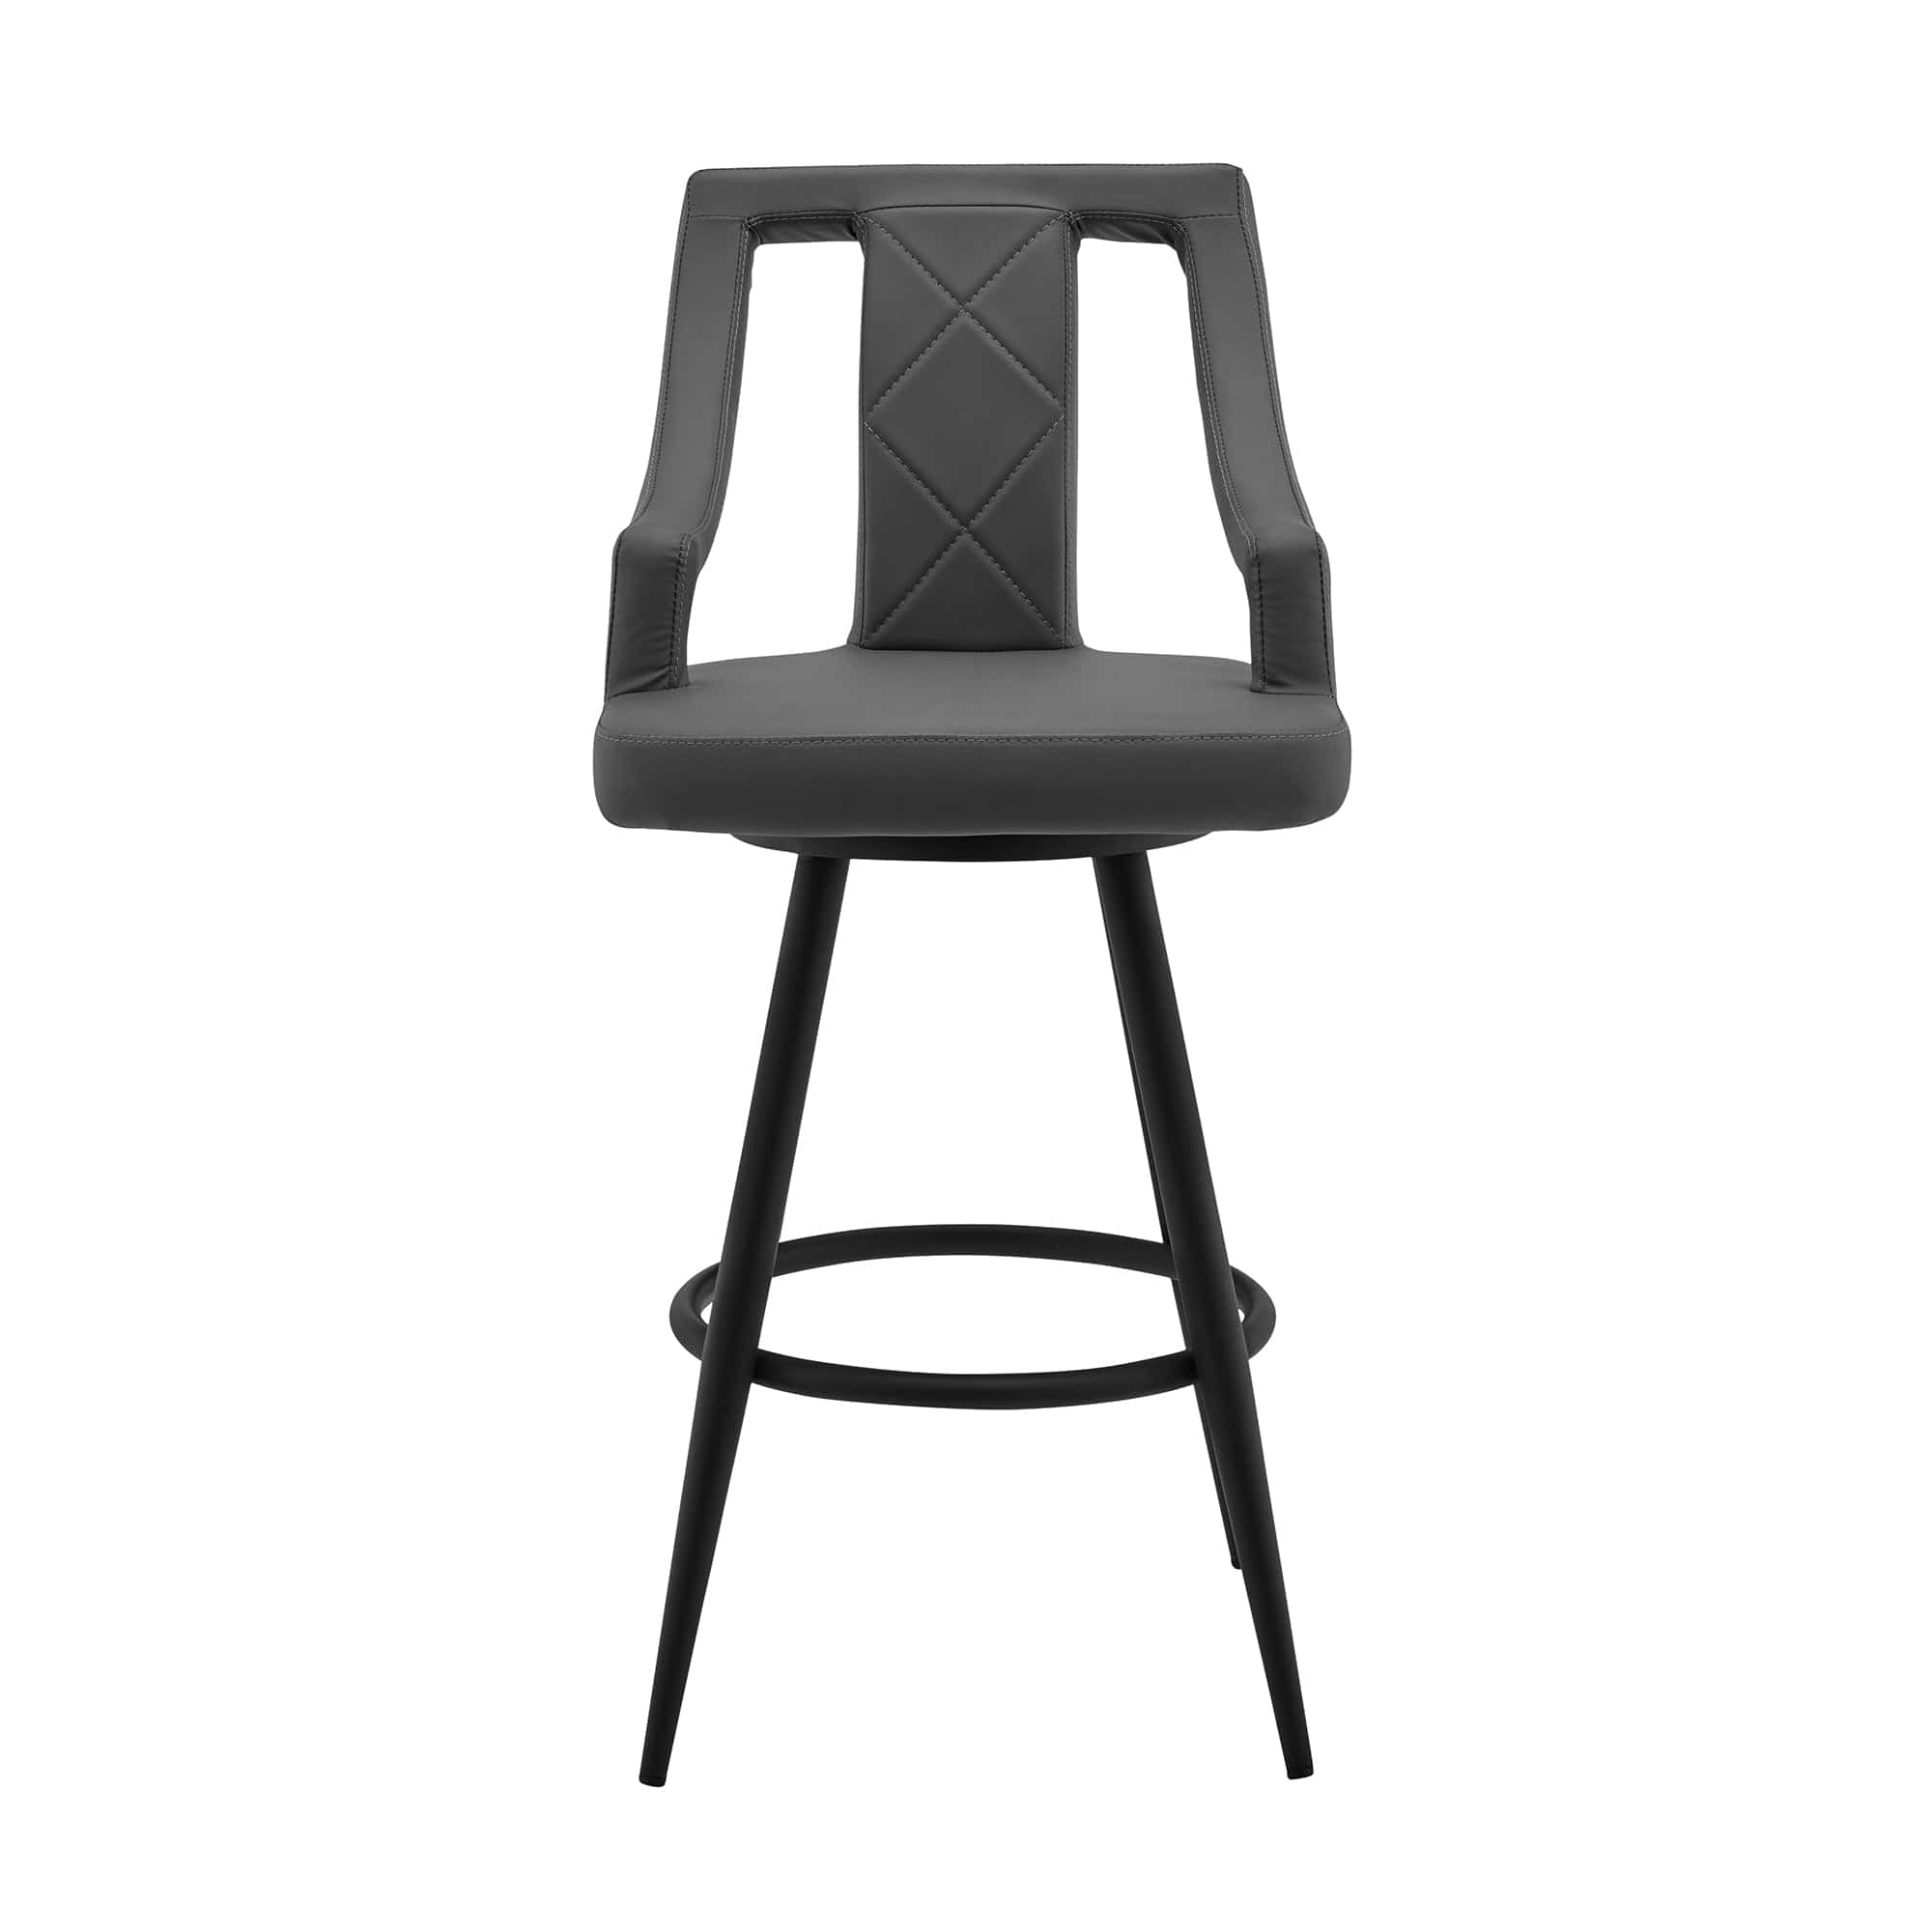 Armen Living Barstool Armen Living - Maxen 26" Gray Faux Leather and Brushed Stainless Steel Swivel Bar Stool | LCMXBABSGR26